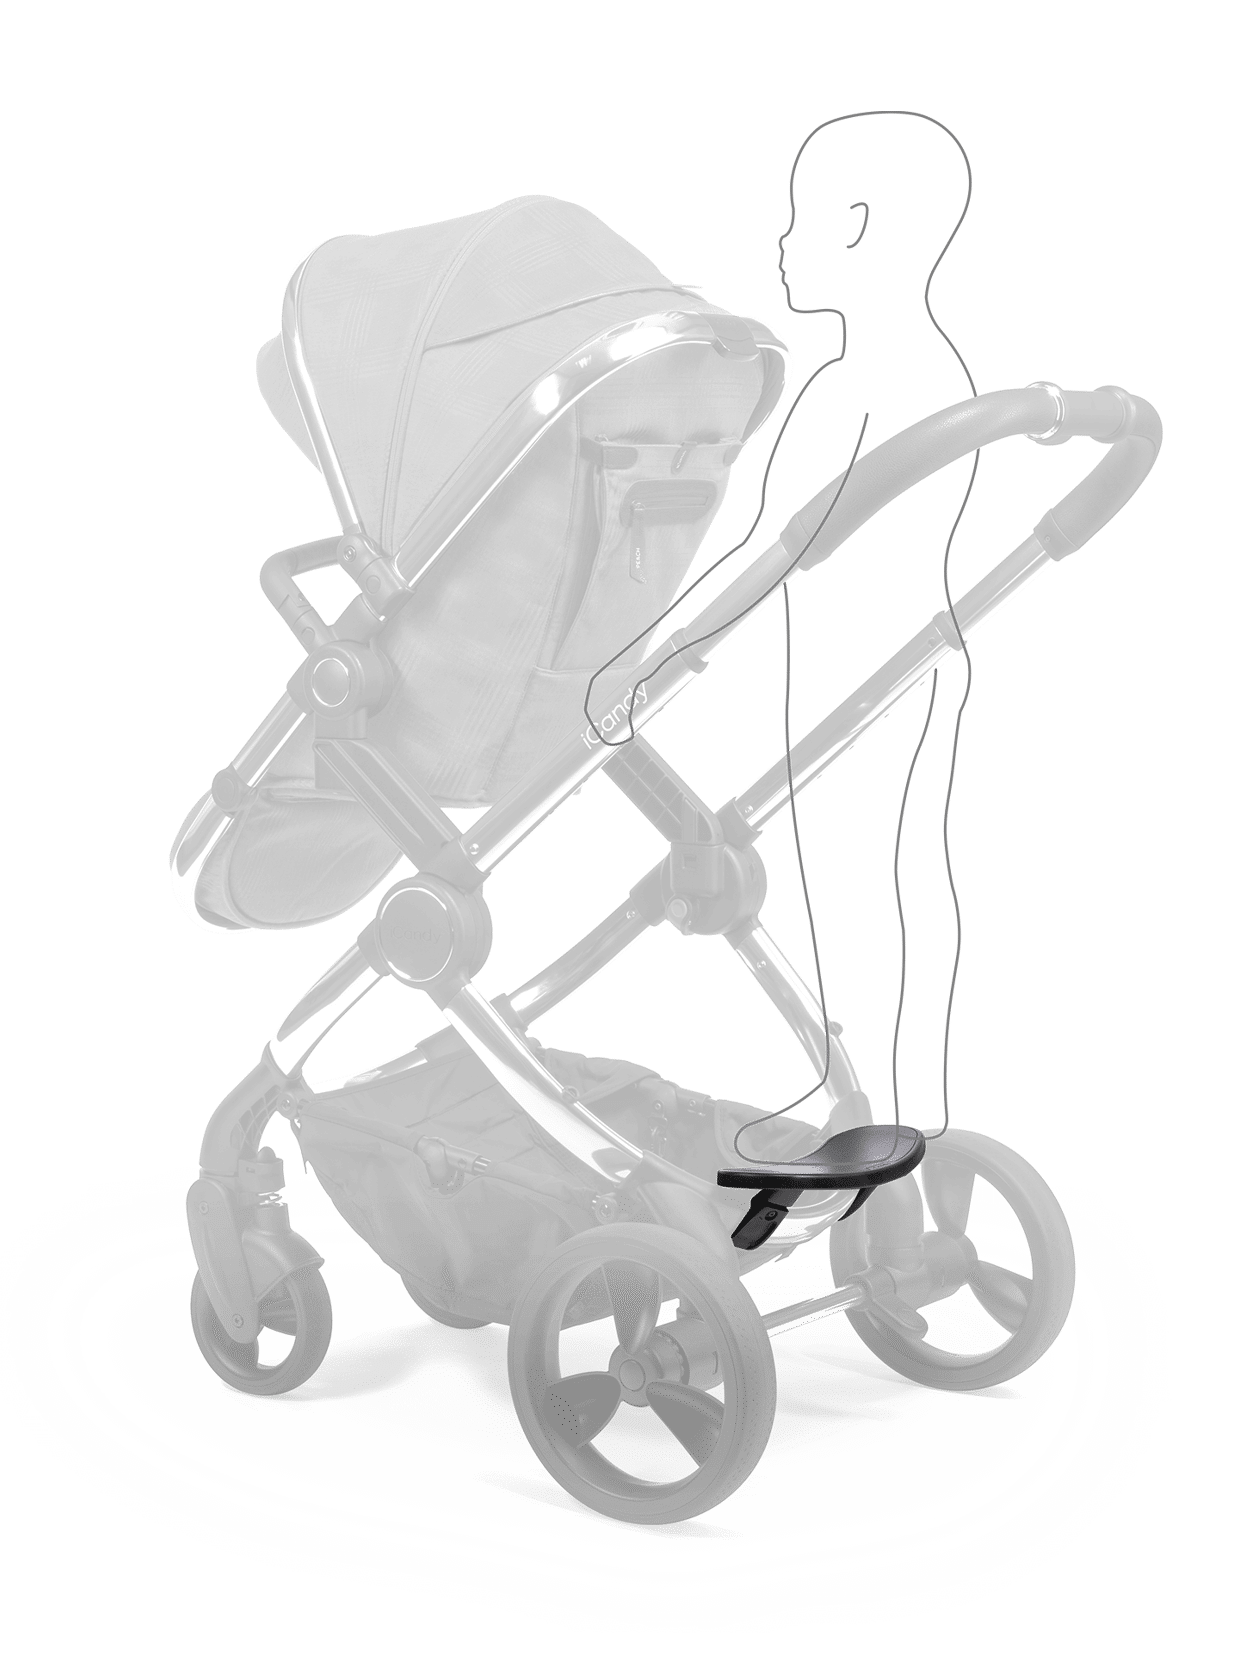 Peach Pushchair and Carrycot With Bag, Duo Pod & Ride-On Board